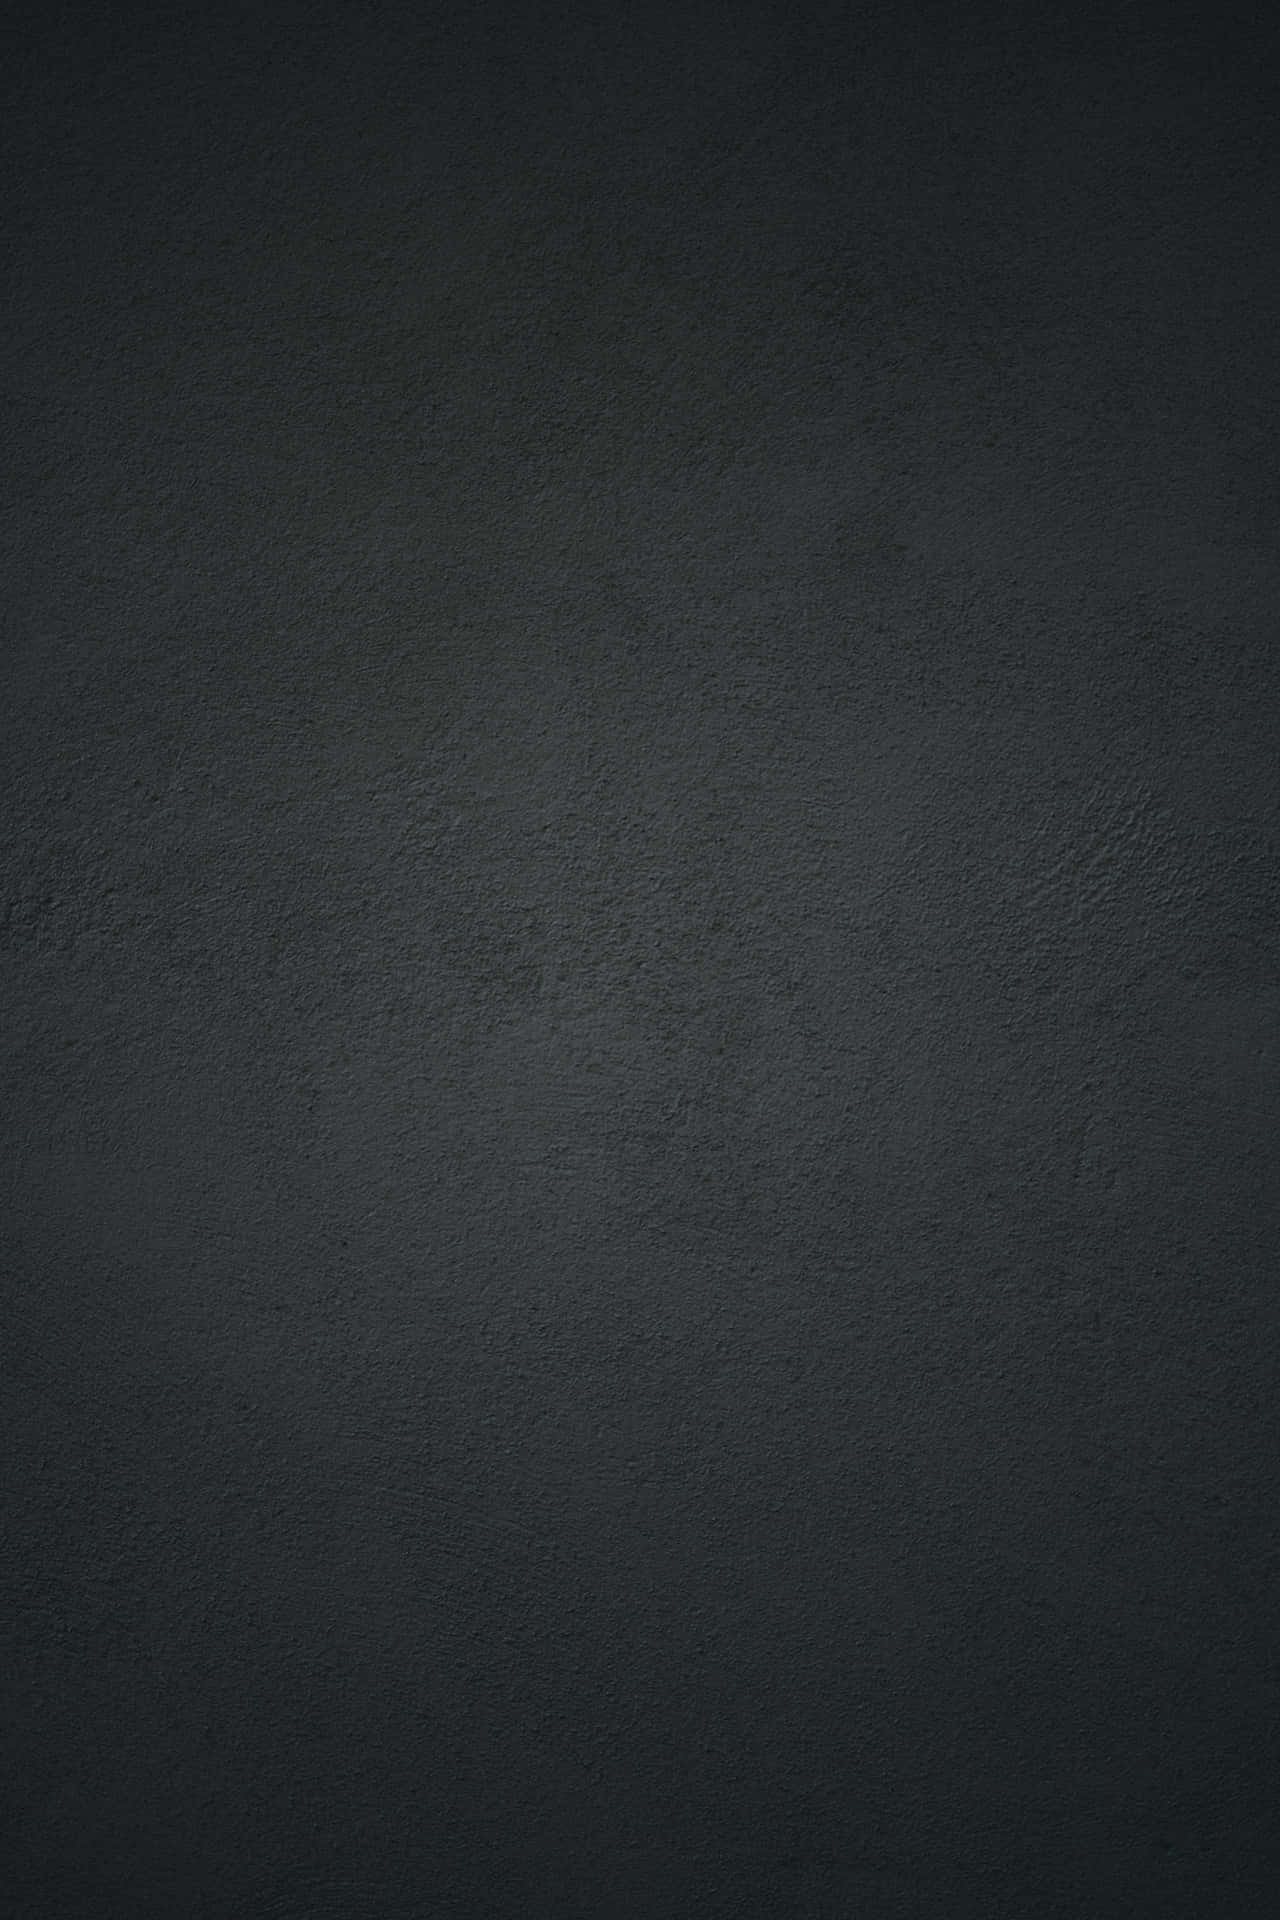 Black Concrete Wall Background With A Light Reflection Background